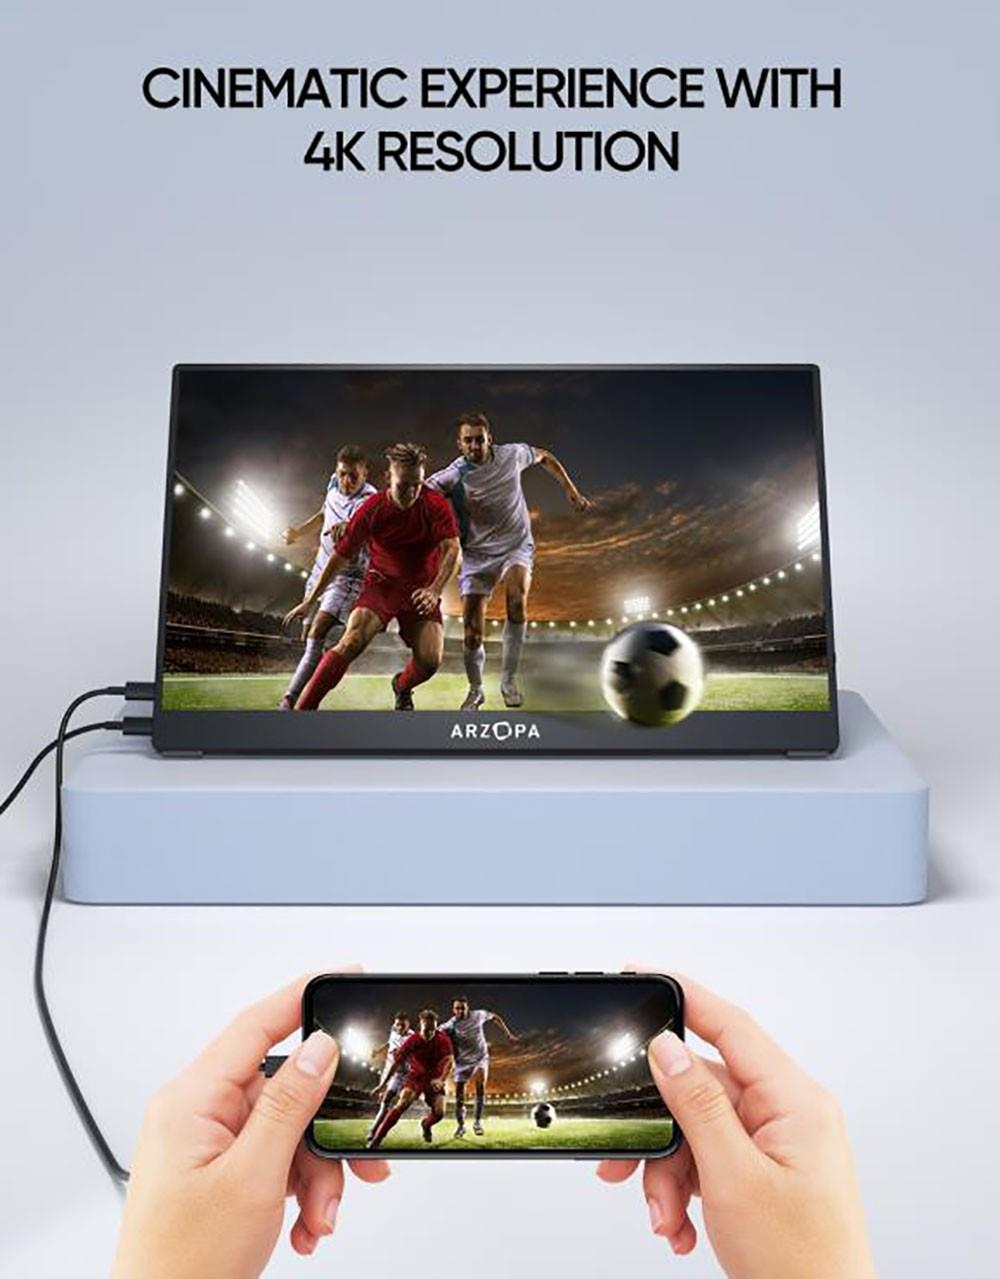 ARZOPA 15.6in Portable Monitor 1920*1080, 60Hz Refresh Rate, HDR 10, Built-in Dual Speakers